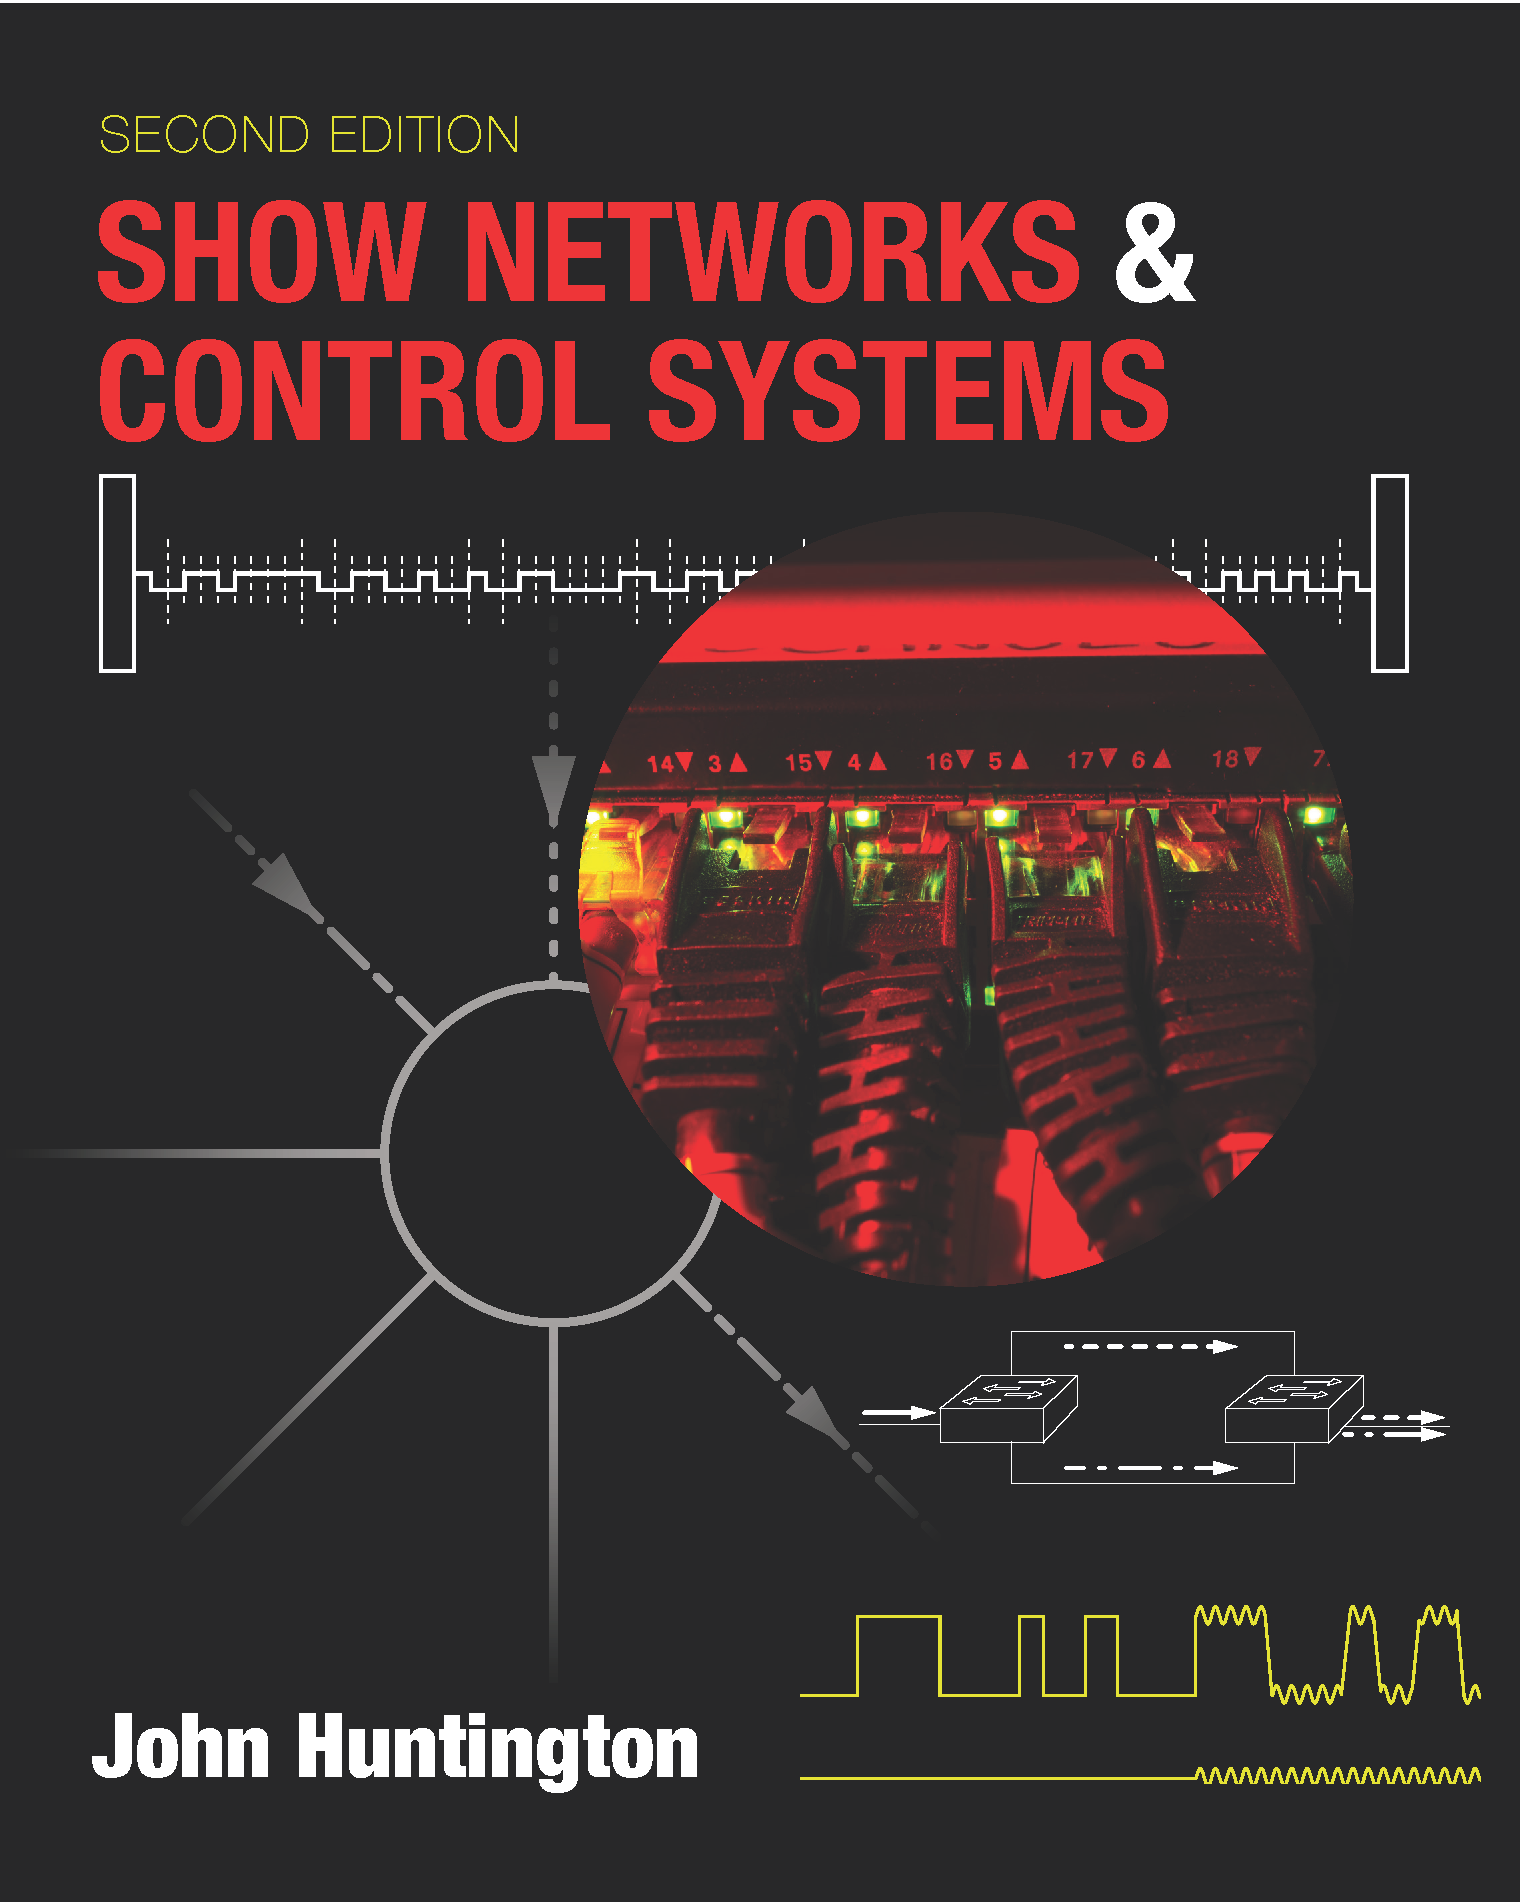 Show Networks and Control Systems book cover 2018_final-CroppedFrontCoverOnly.png